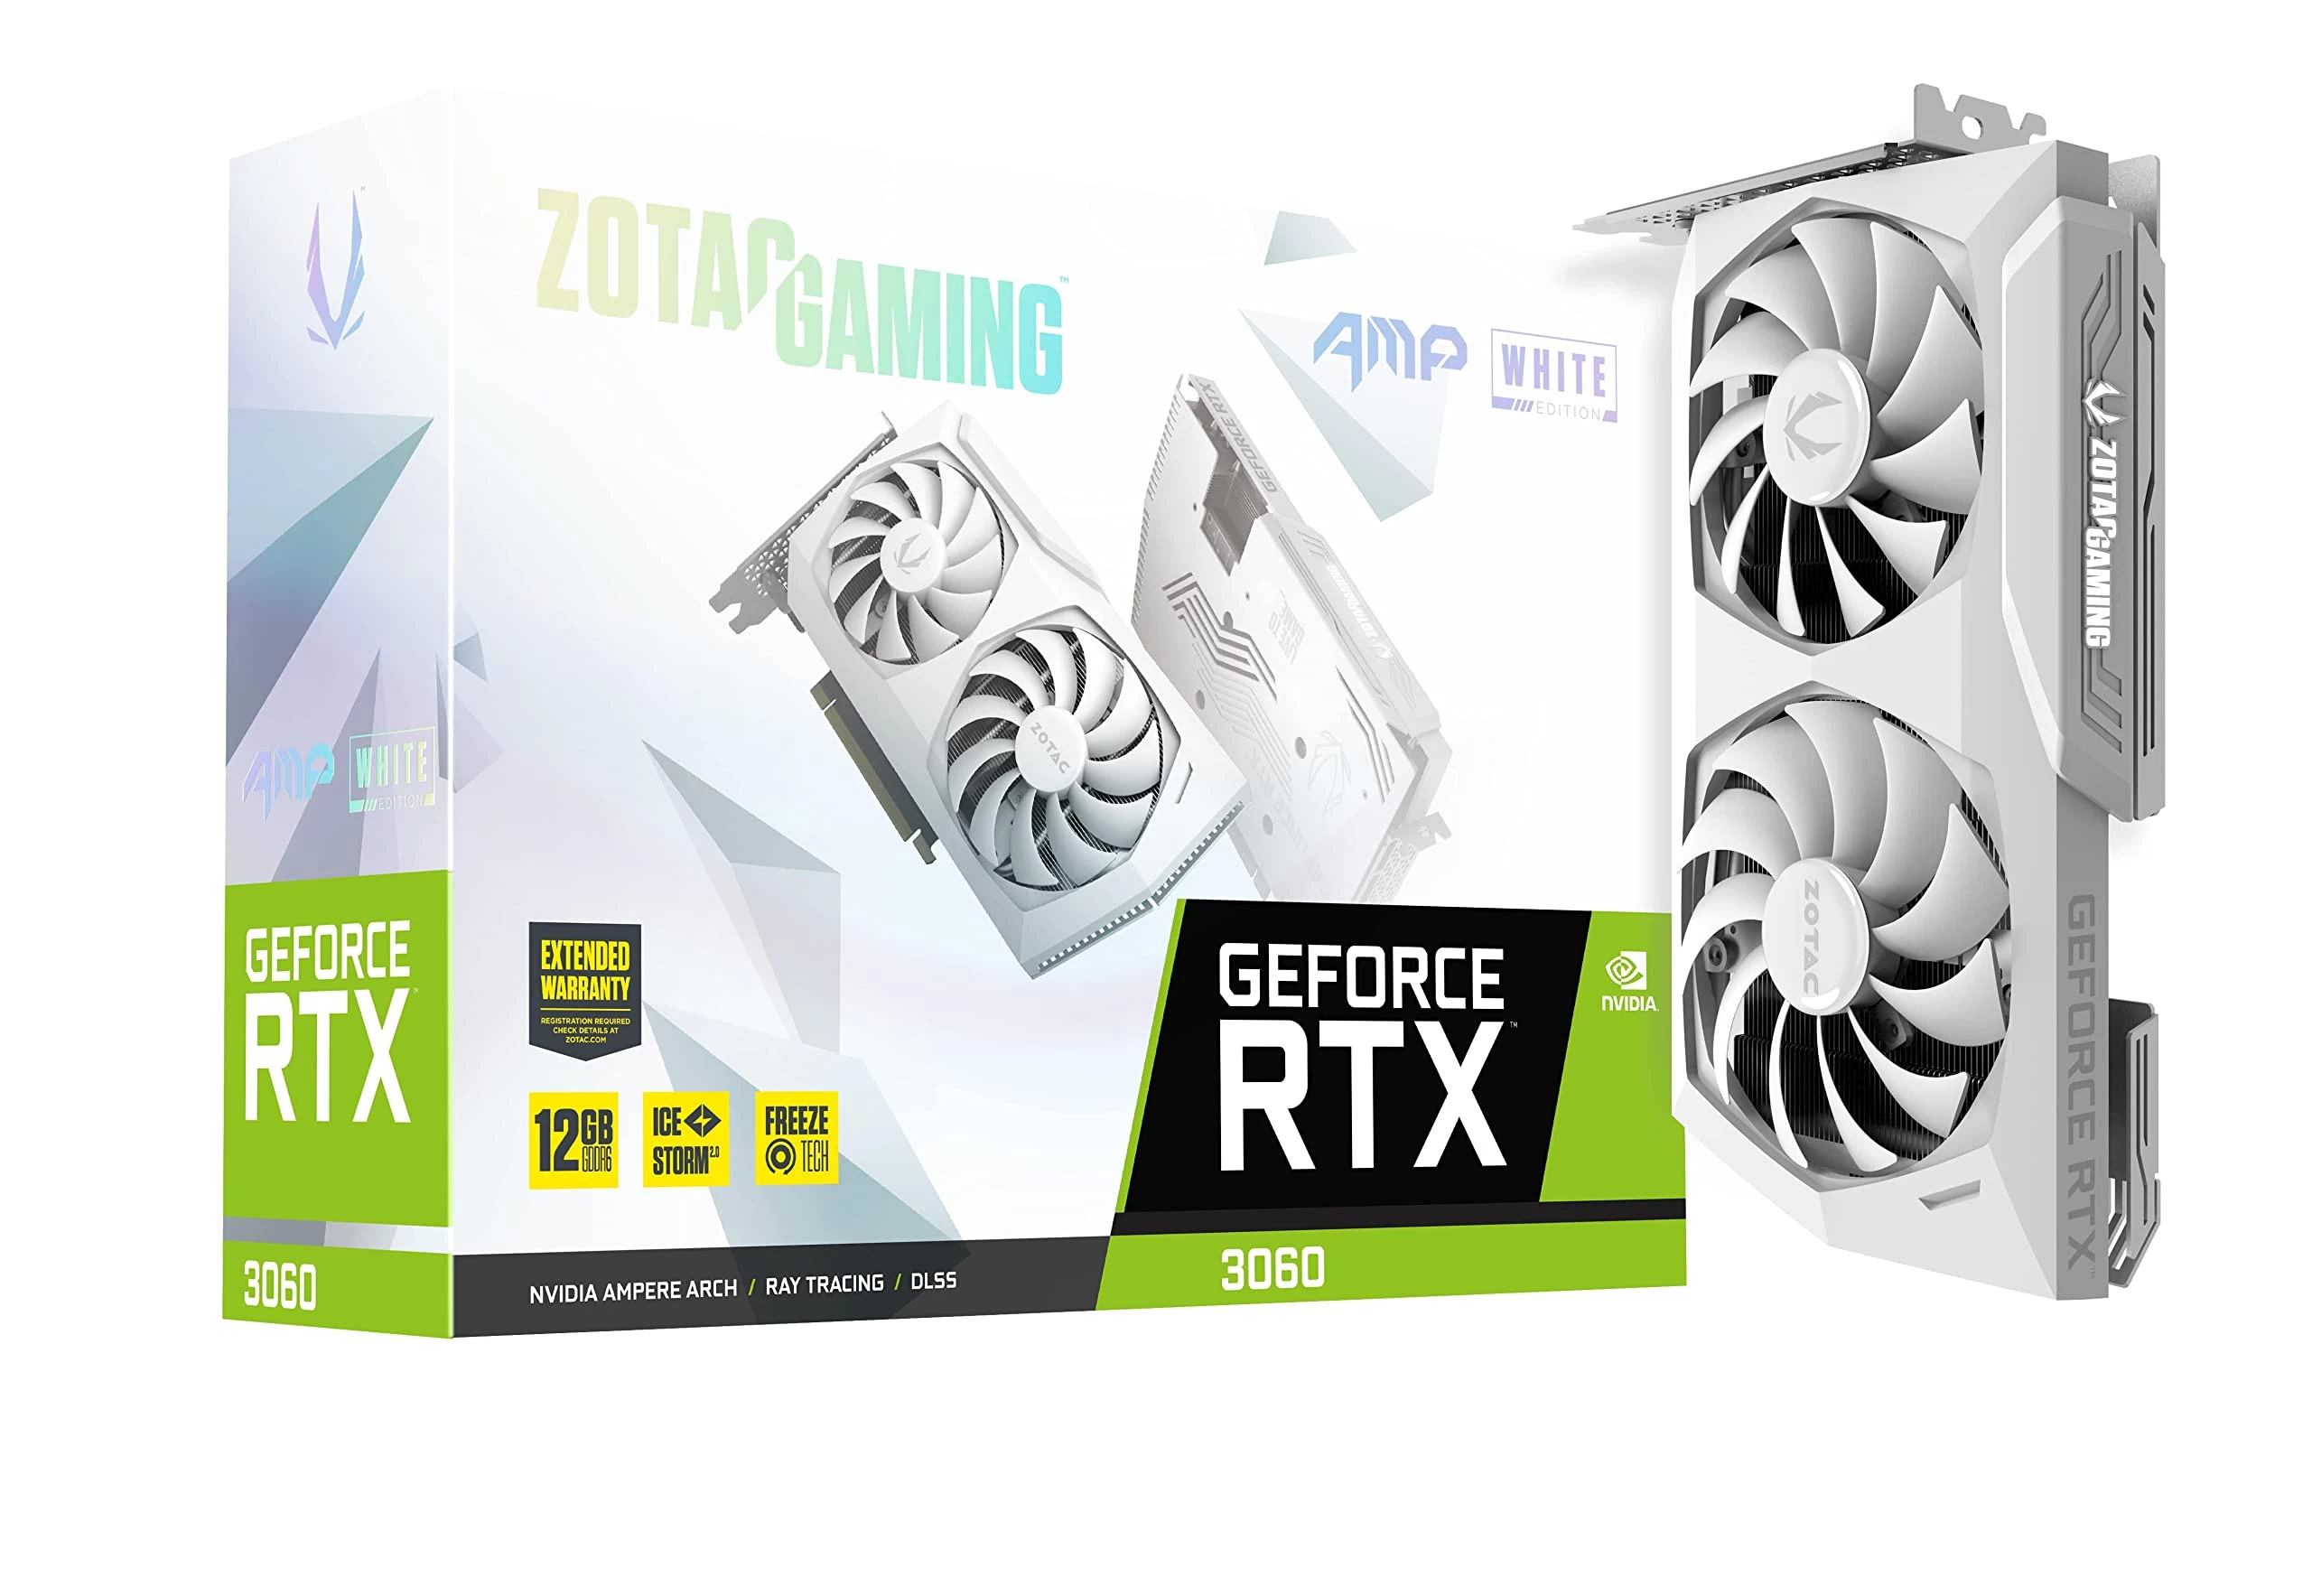 Zotac GAMING GeForce RTX 3060 AMP White Edition Package